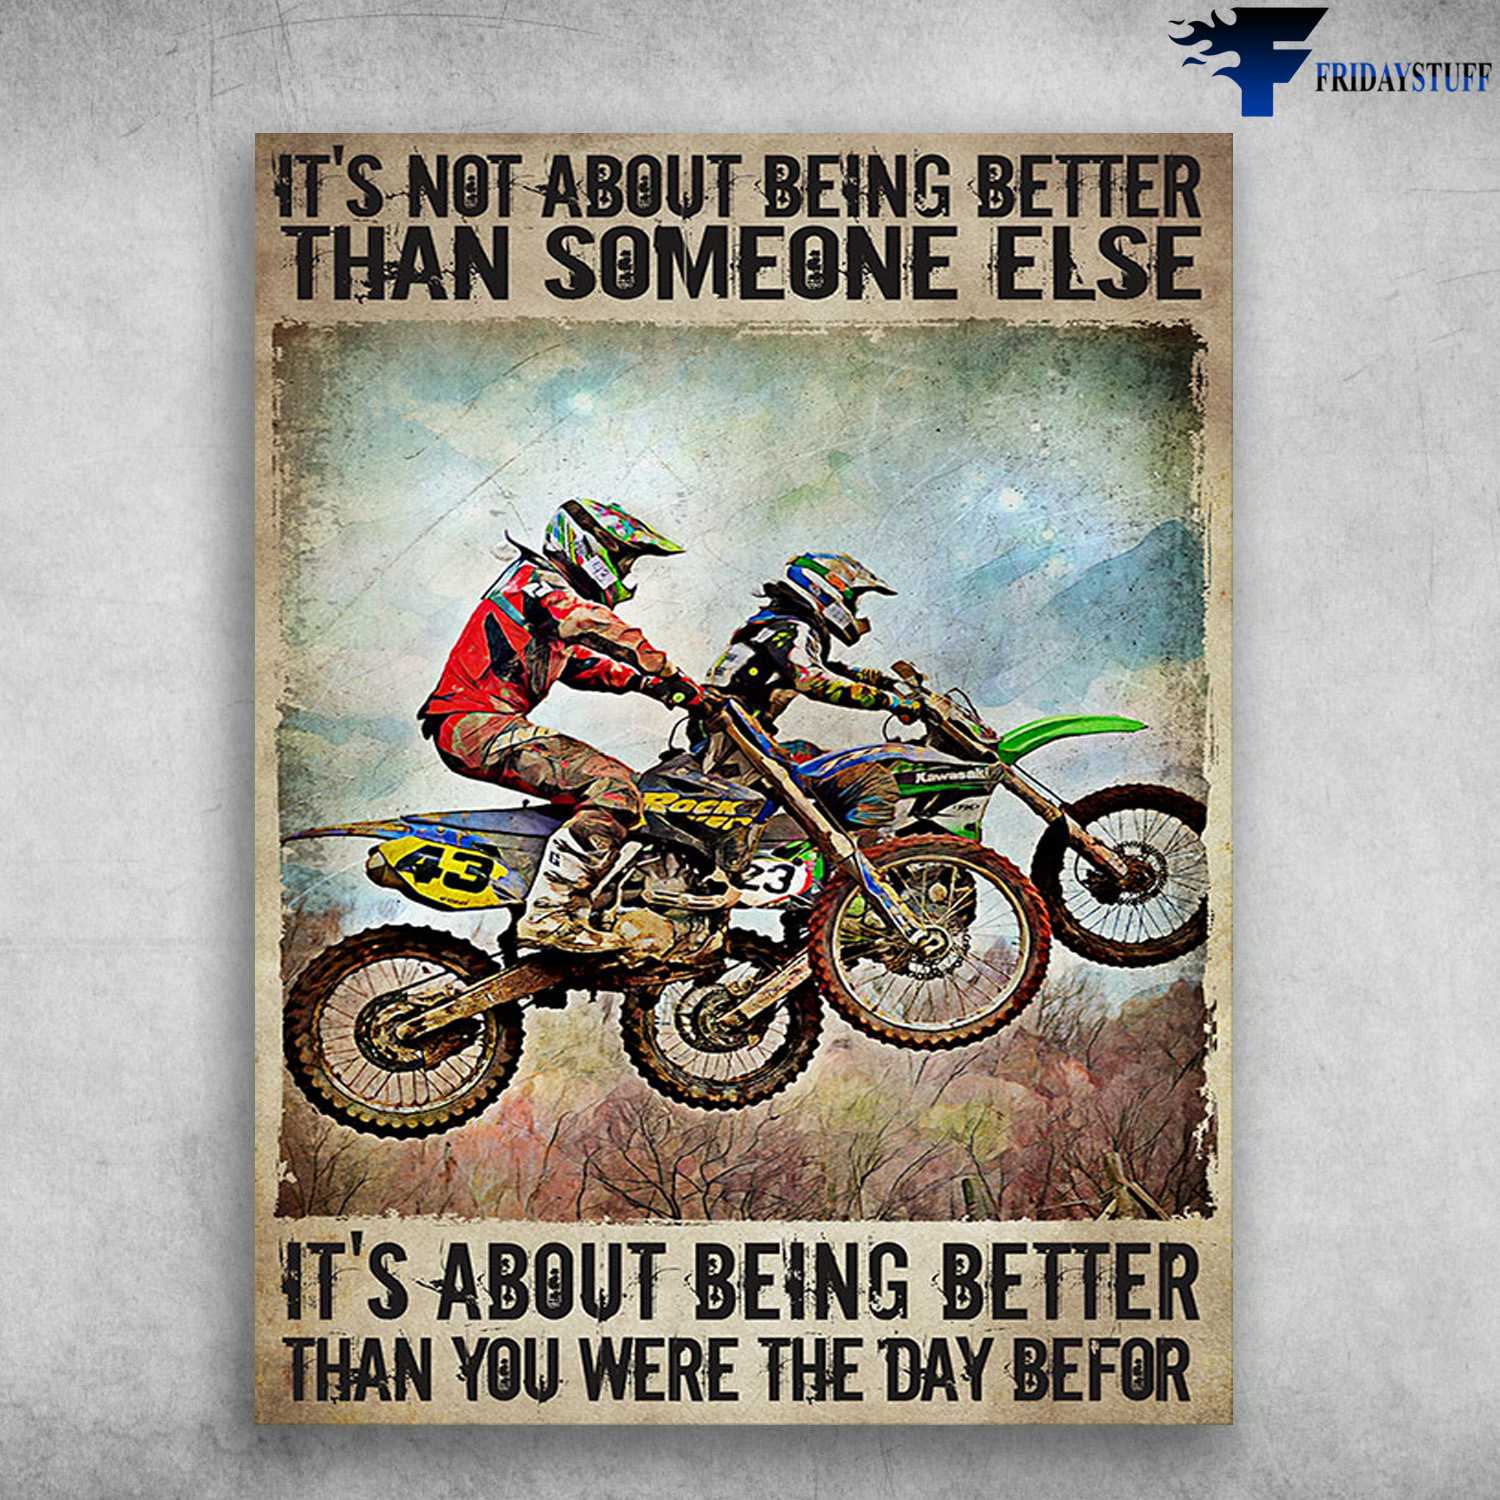 Motocross Couple, Dirtbike Poster - It's Not About Being Better, Than Some One Else, It's About Being Better, Than You Were The Day Before